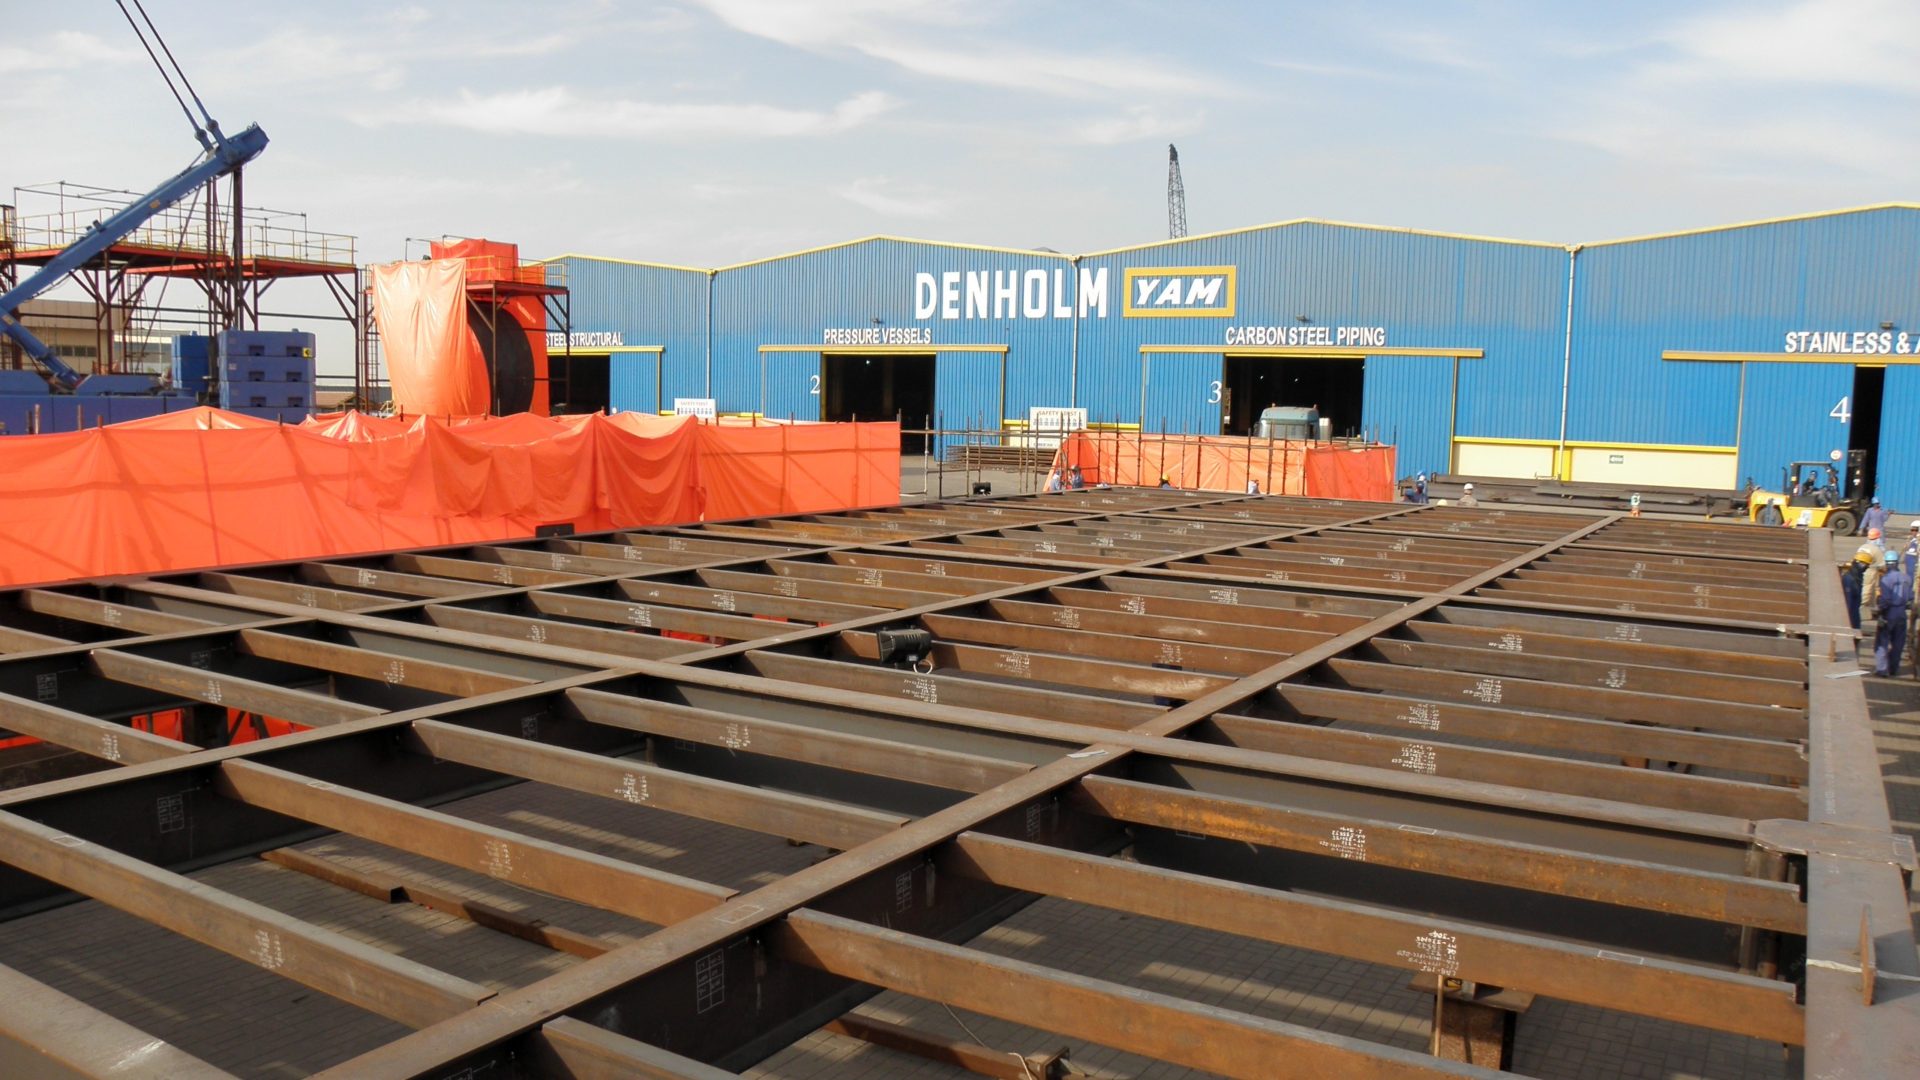 MODULAR BUILDINGS FABRICATION WORKS FOR UPPER ZAKUM 750 ISLAND SURFACE FACILITIES PROJECT